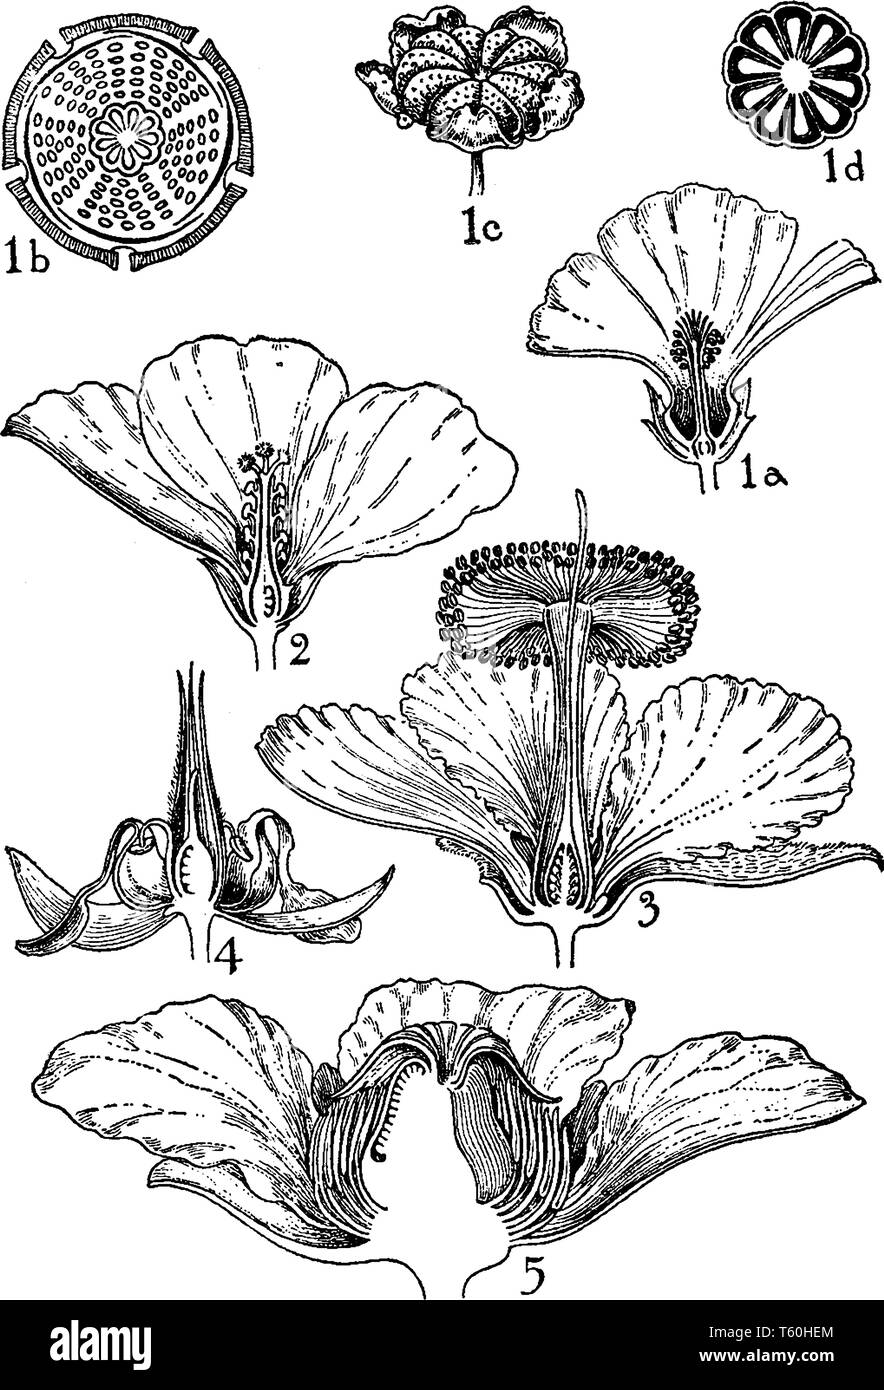 The Flowers showing in the picture are (1) Malva, (2) Hibiscus, (3) Adansonia, (4) Theobroma, and (5) Dillenia. The families of the flowers are Malvac Stock Vector